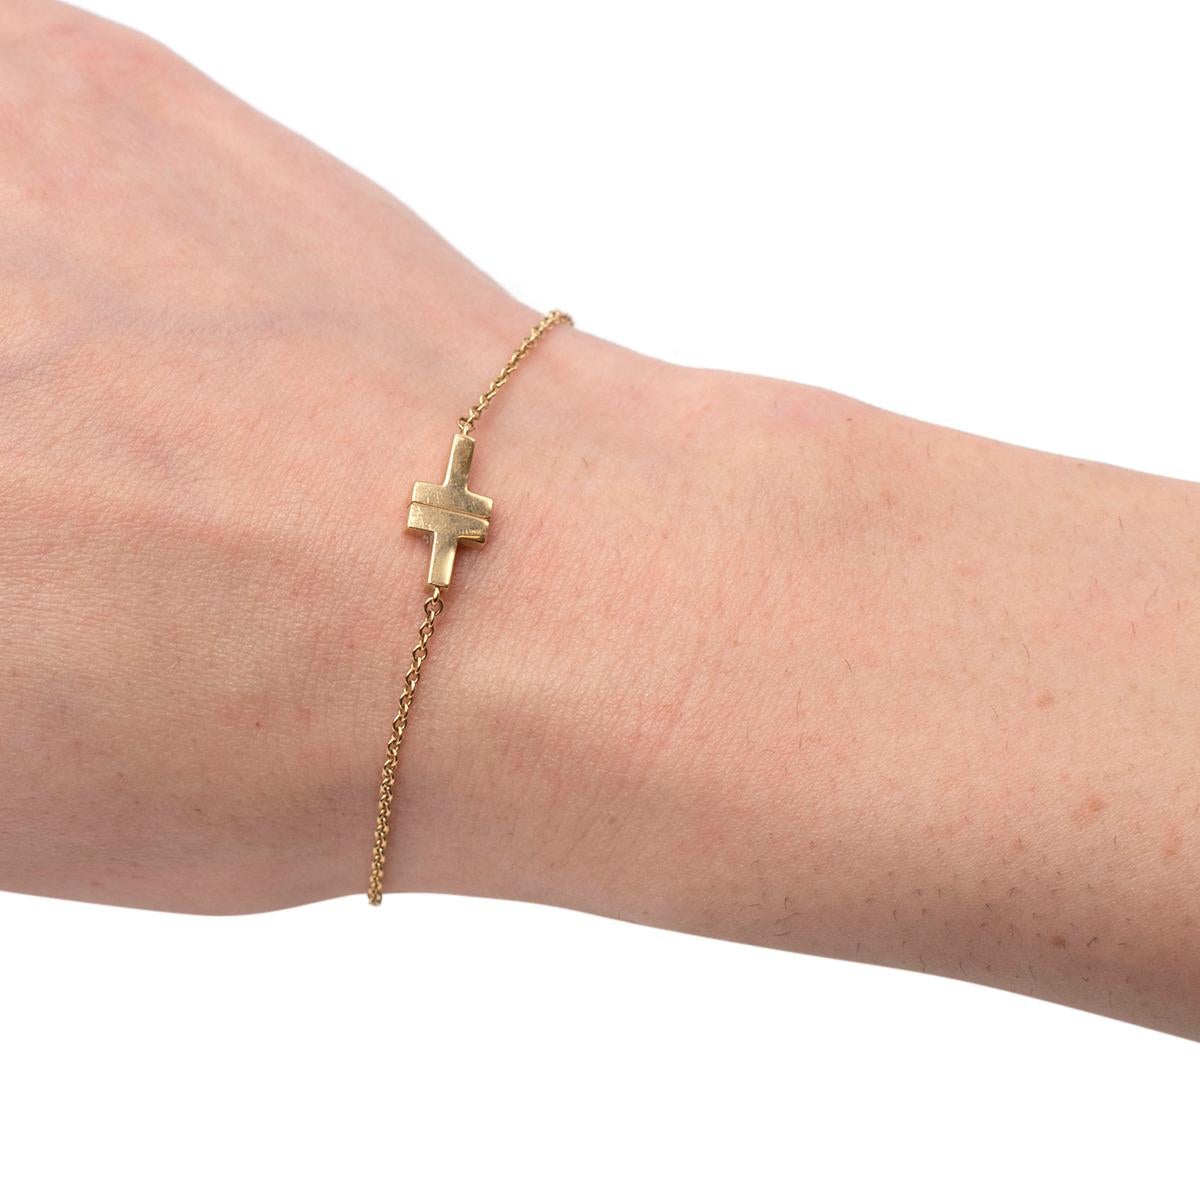 Tiffany & Co. T Collection 18k Gold Single Chain Bracelet

- Delicate chain bracelet in 18k gold
- Signature for the collection T centre motif
- Spring ring clasp

Measurements:
Length - 15.9-17.1cm
T Width - 0.6cm

Materials:
18k Gold

PLEASE NOTE,